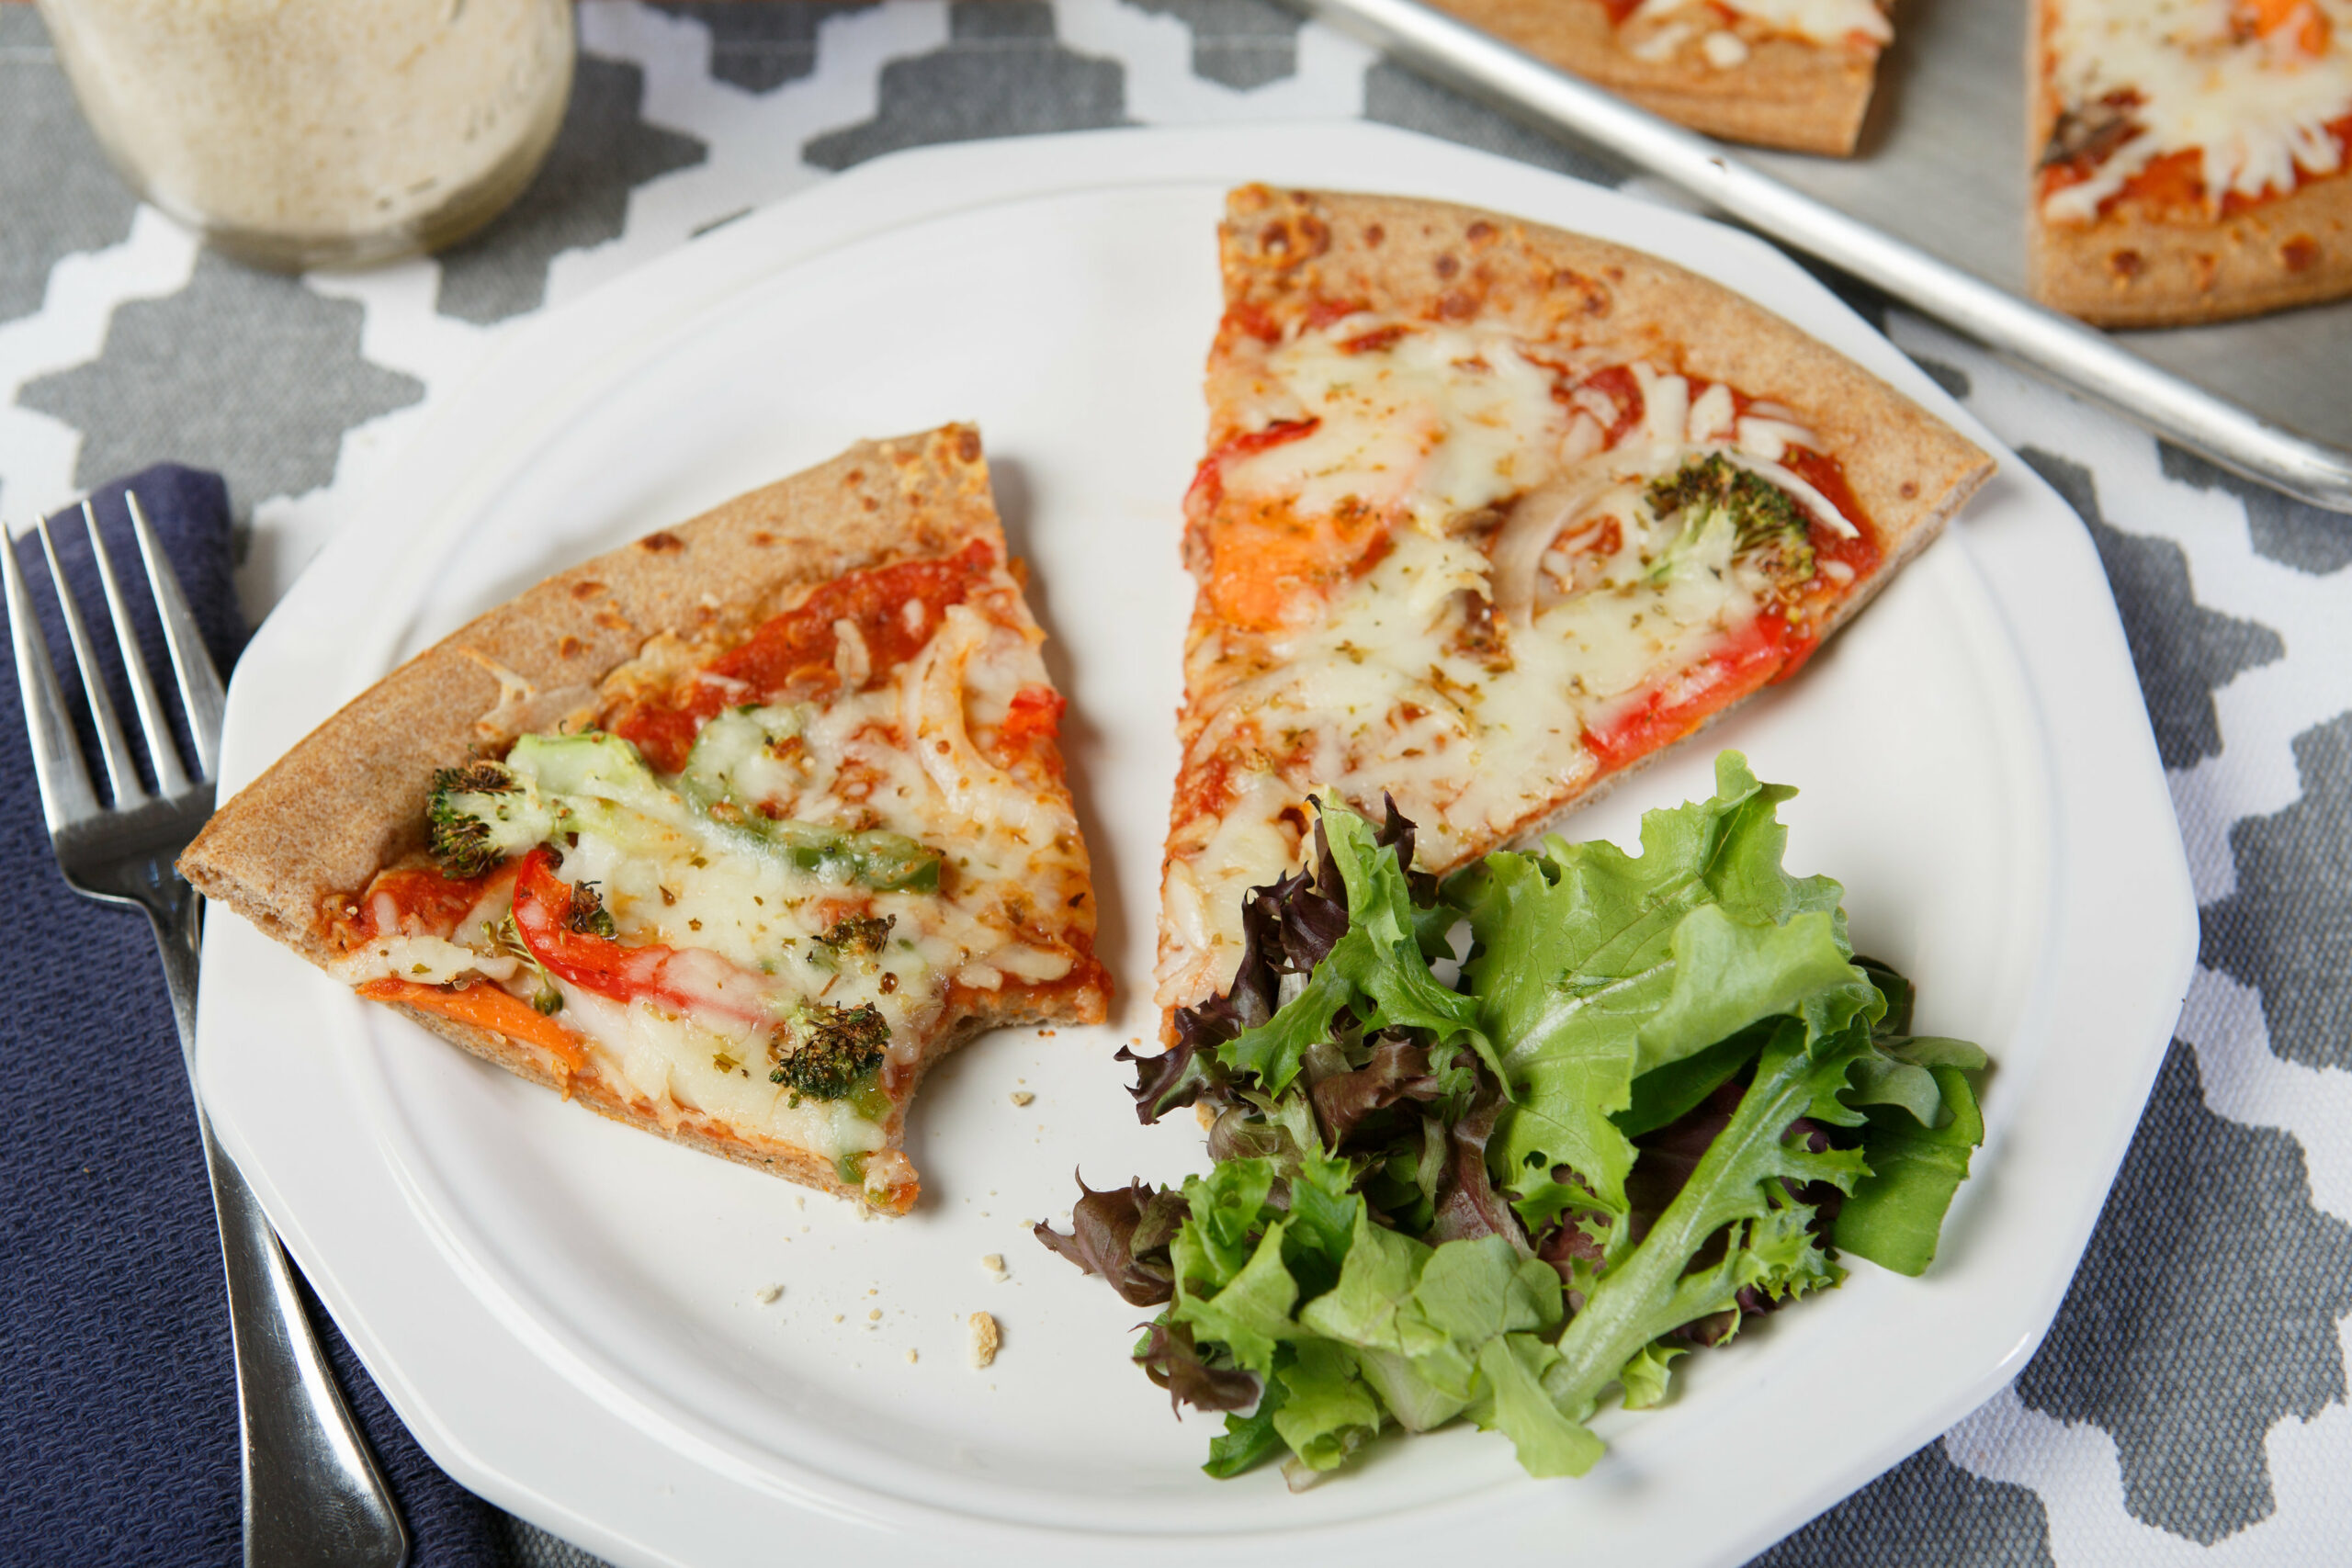 plate with roasted vegetable pizza and salad